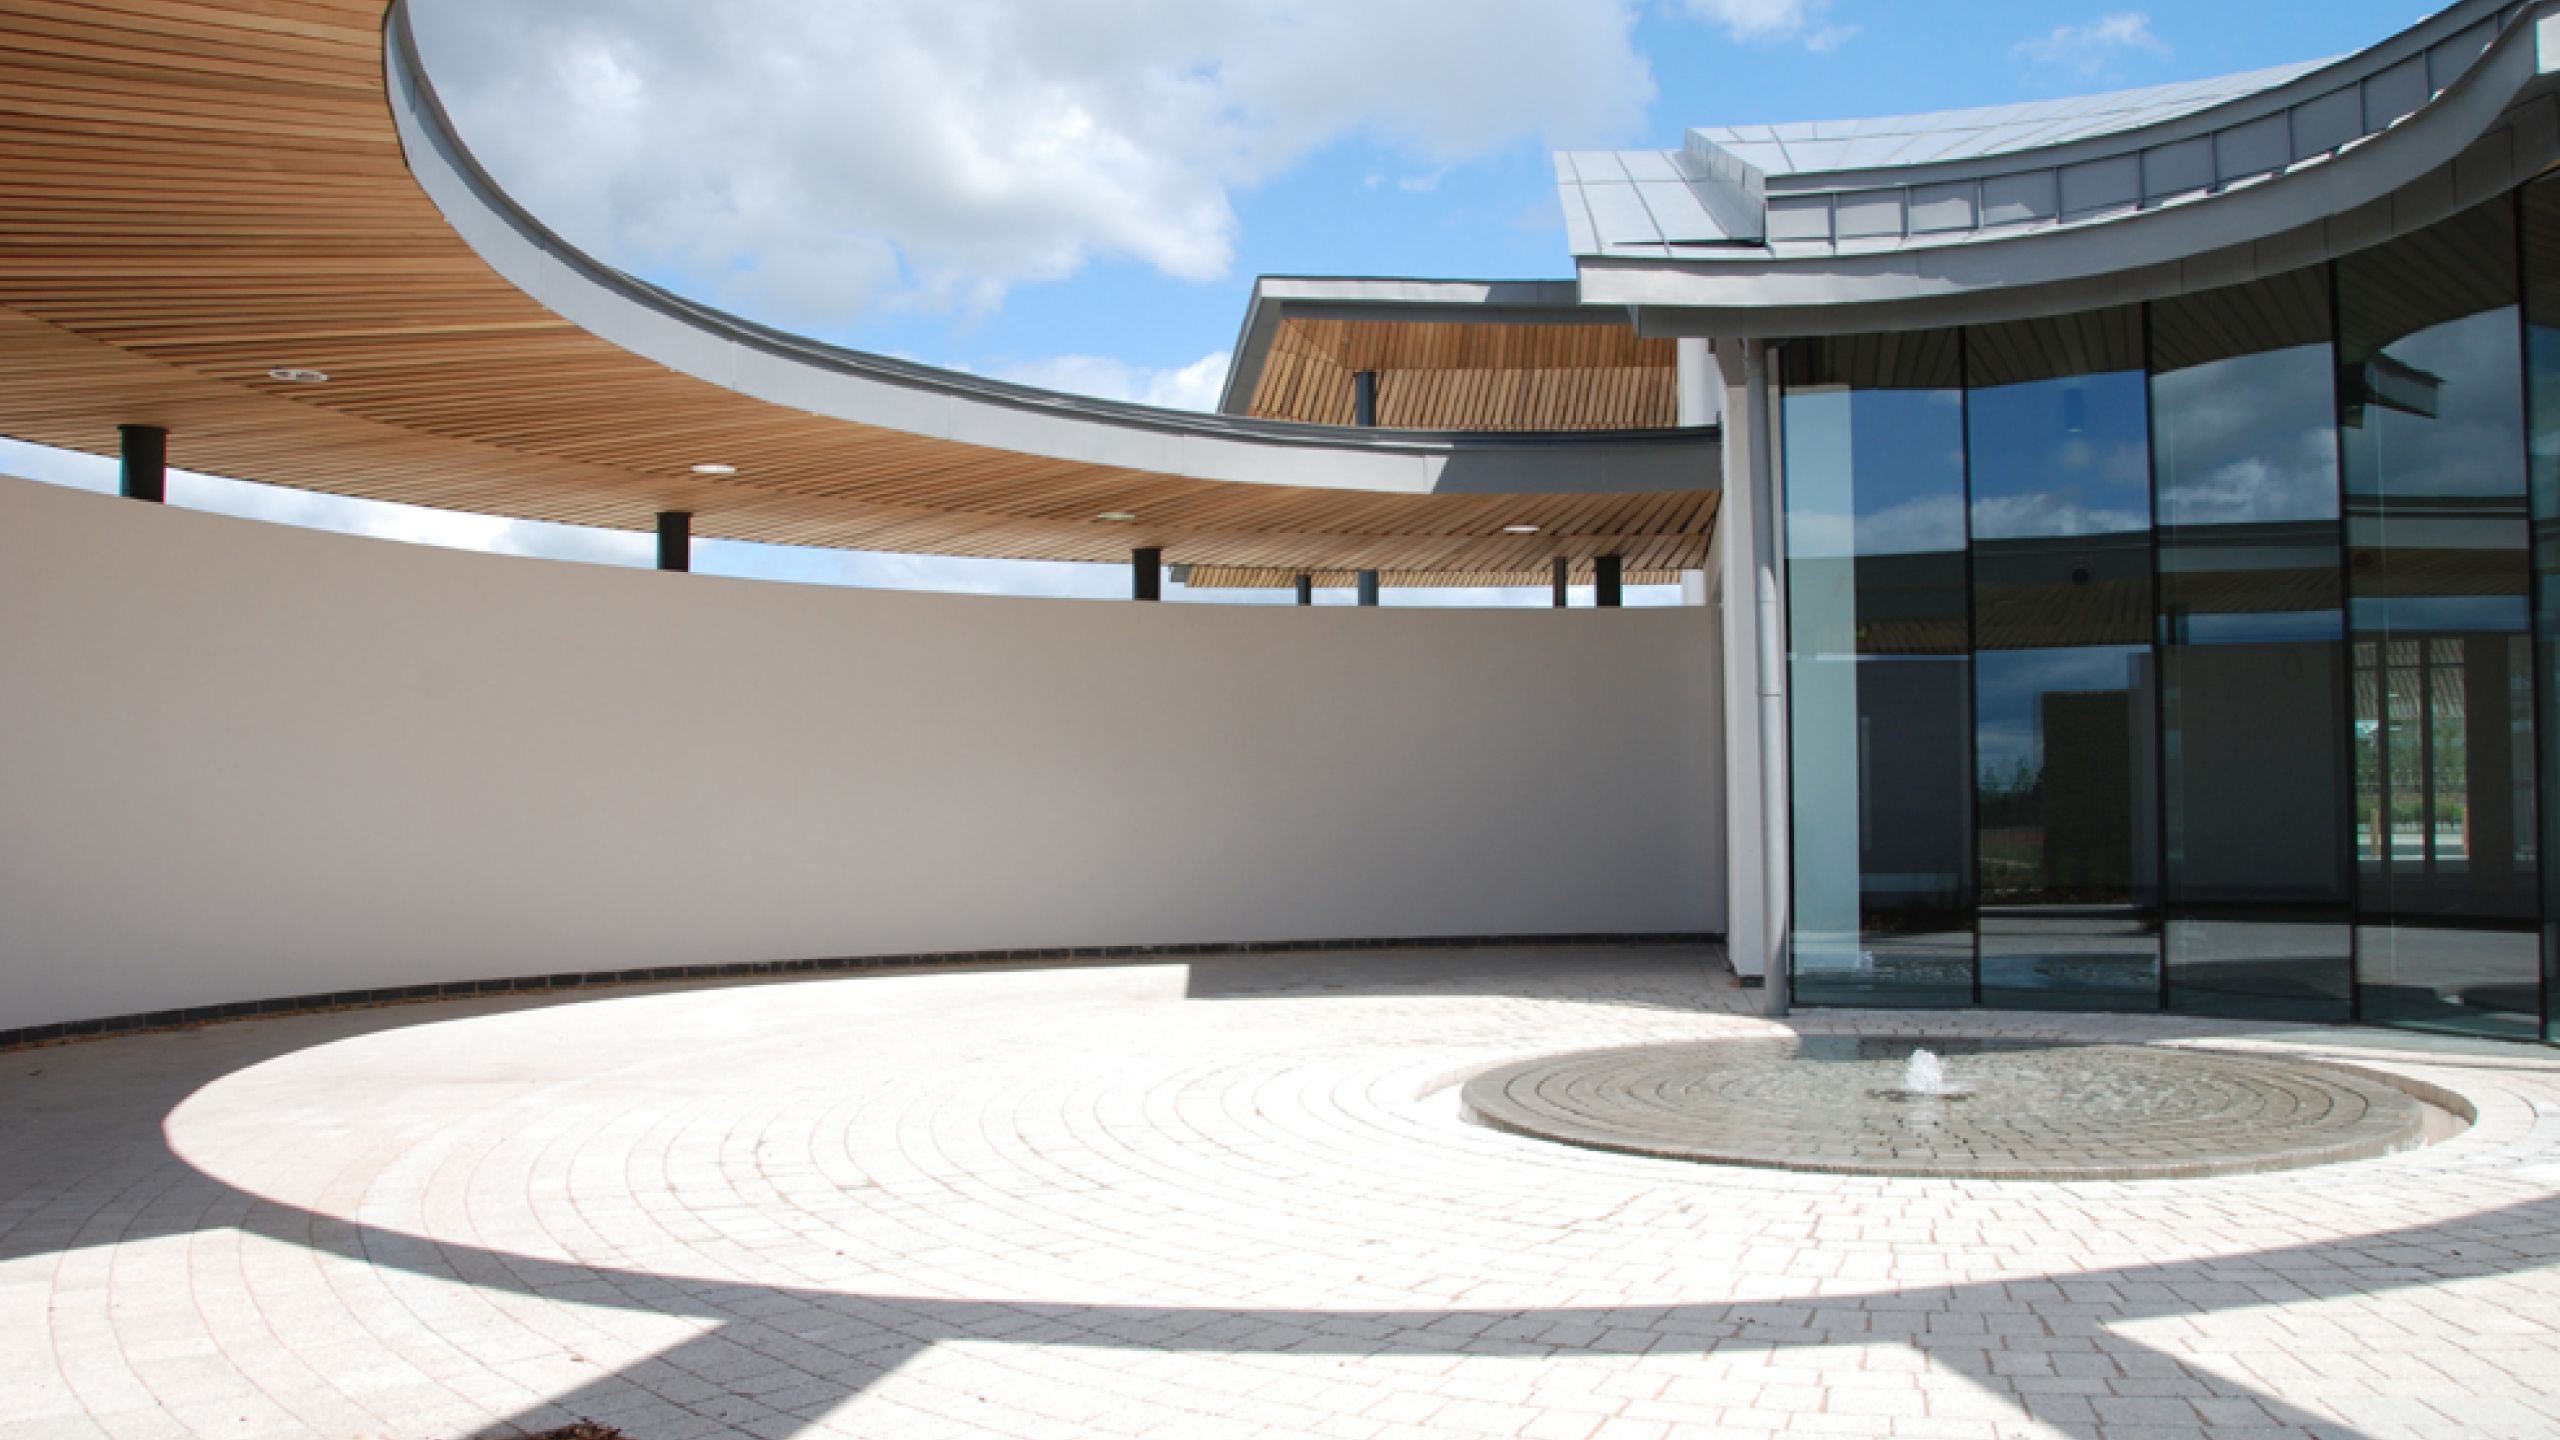 Circular outdoor wood ceiling by BCL Timber at Wyre Forest Crematorium